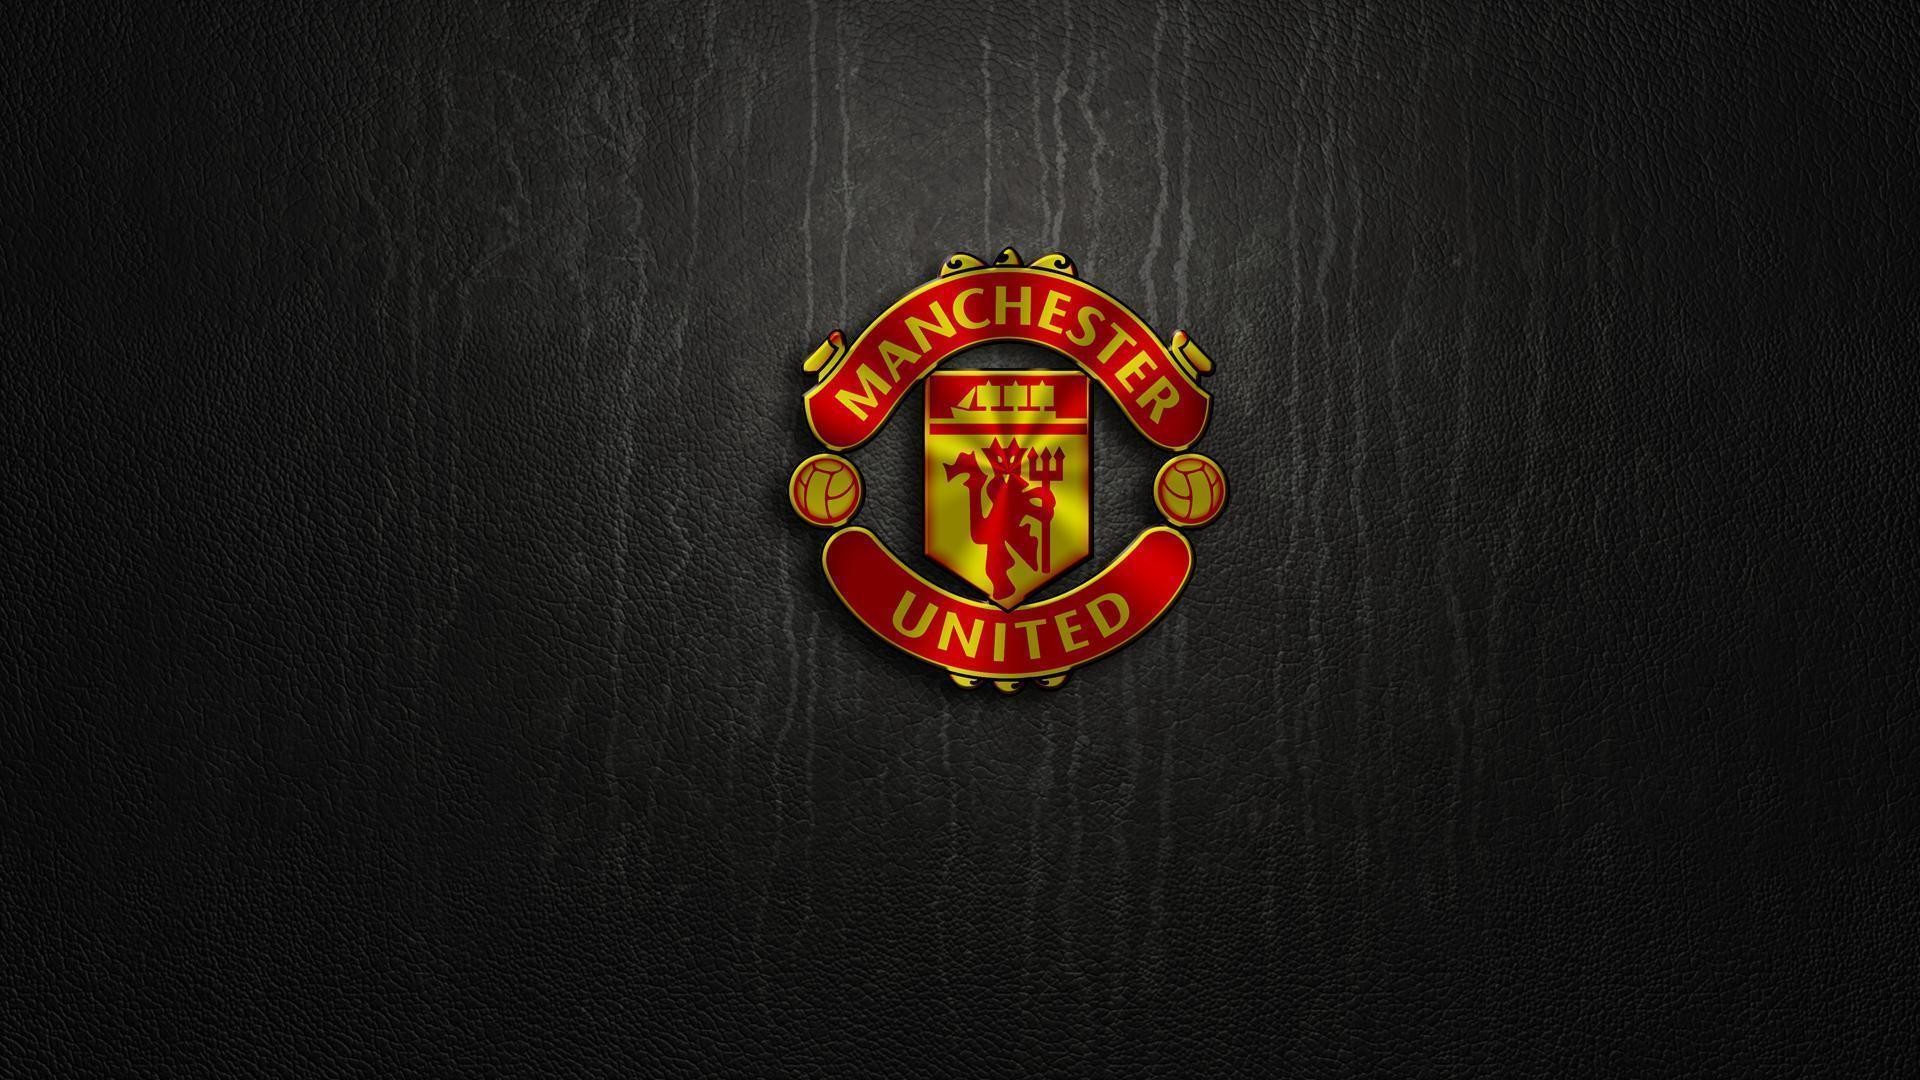 1920x1080 Manchester United Logo High Quality Photo Desktop Backgrounds Free